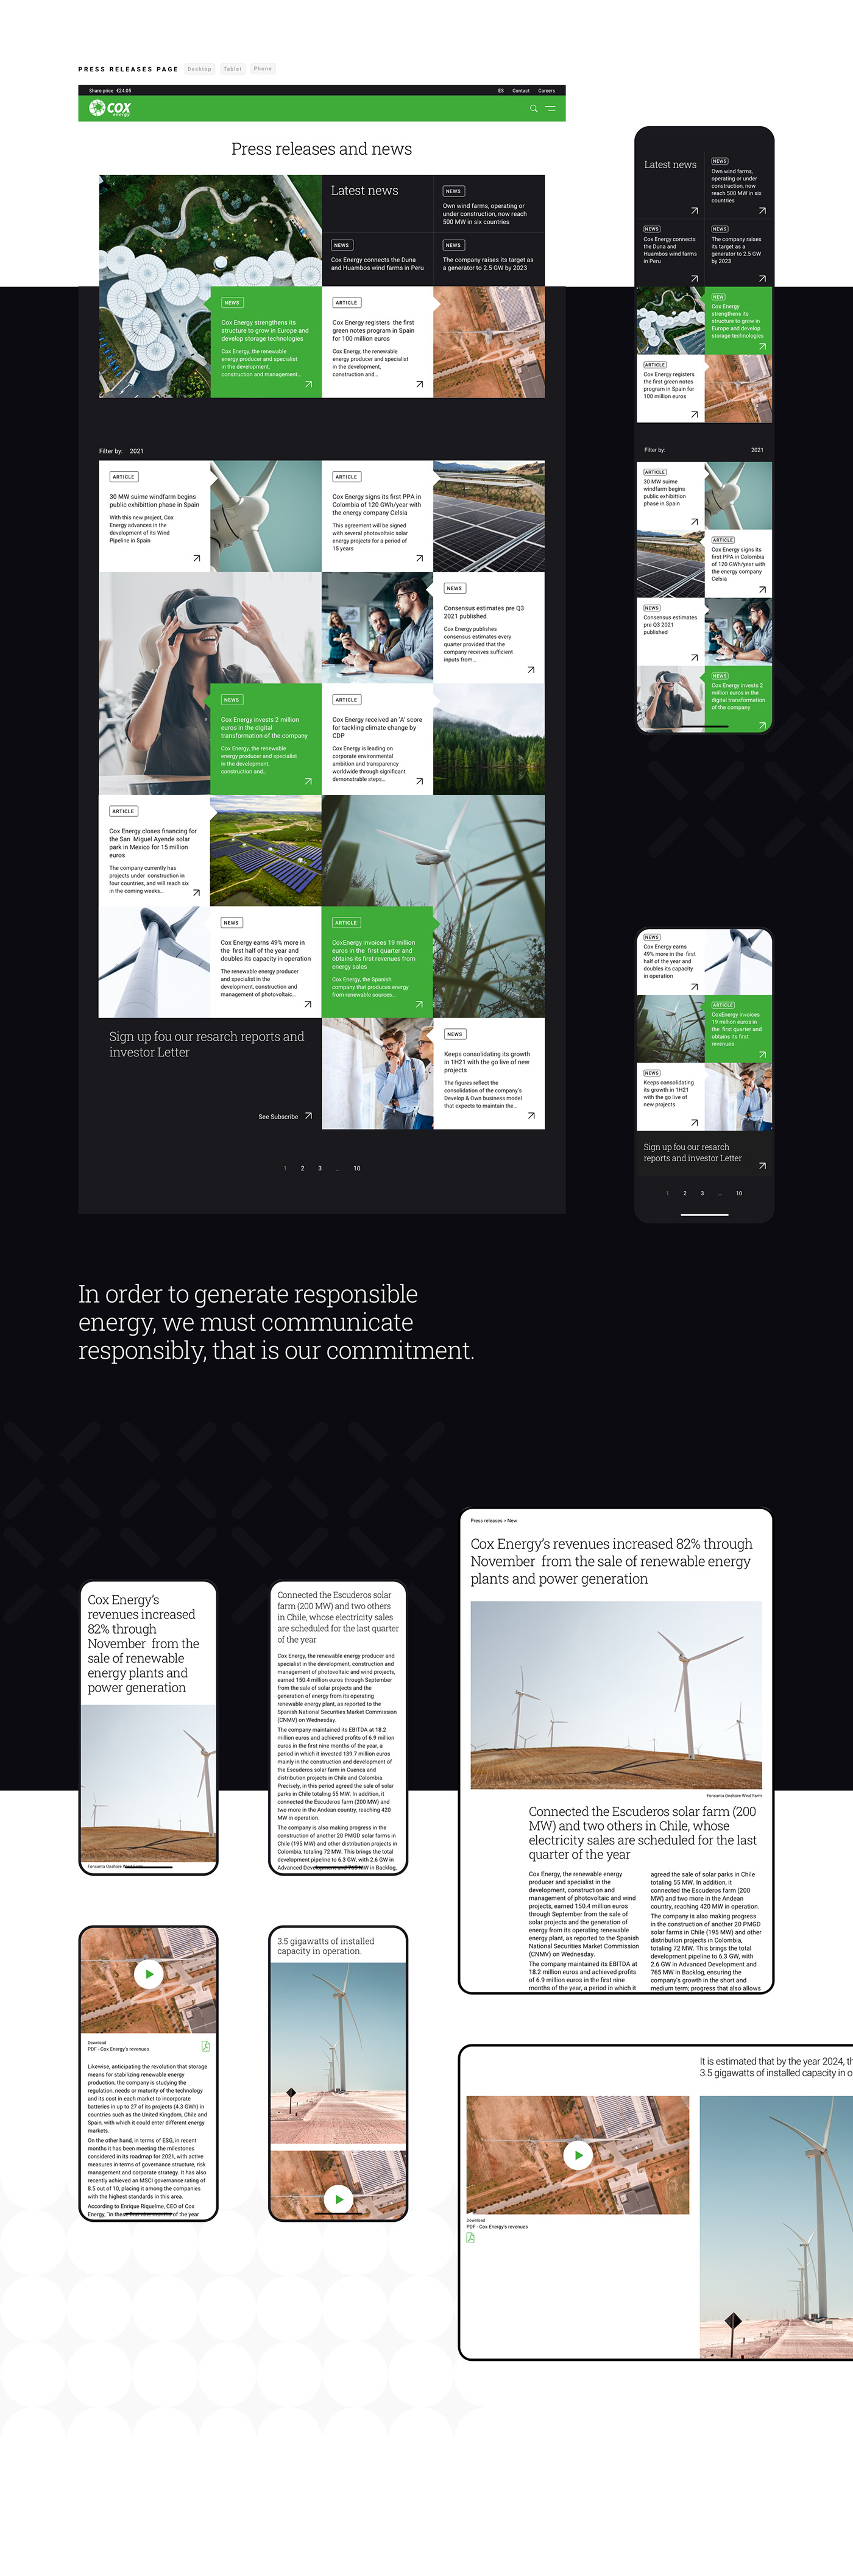 Unveiling the Future: Cox Energy's website redesign embodies sleek minimalism, empowering the clean 